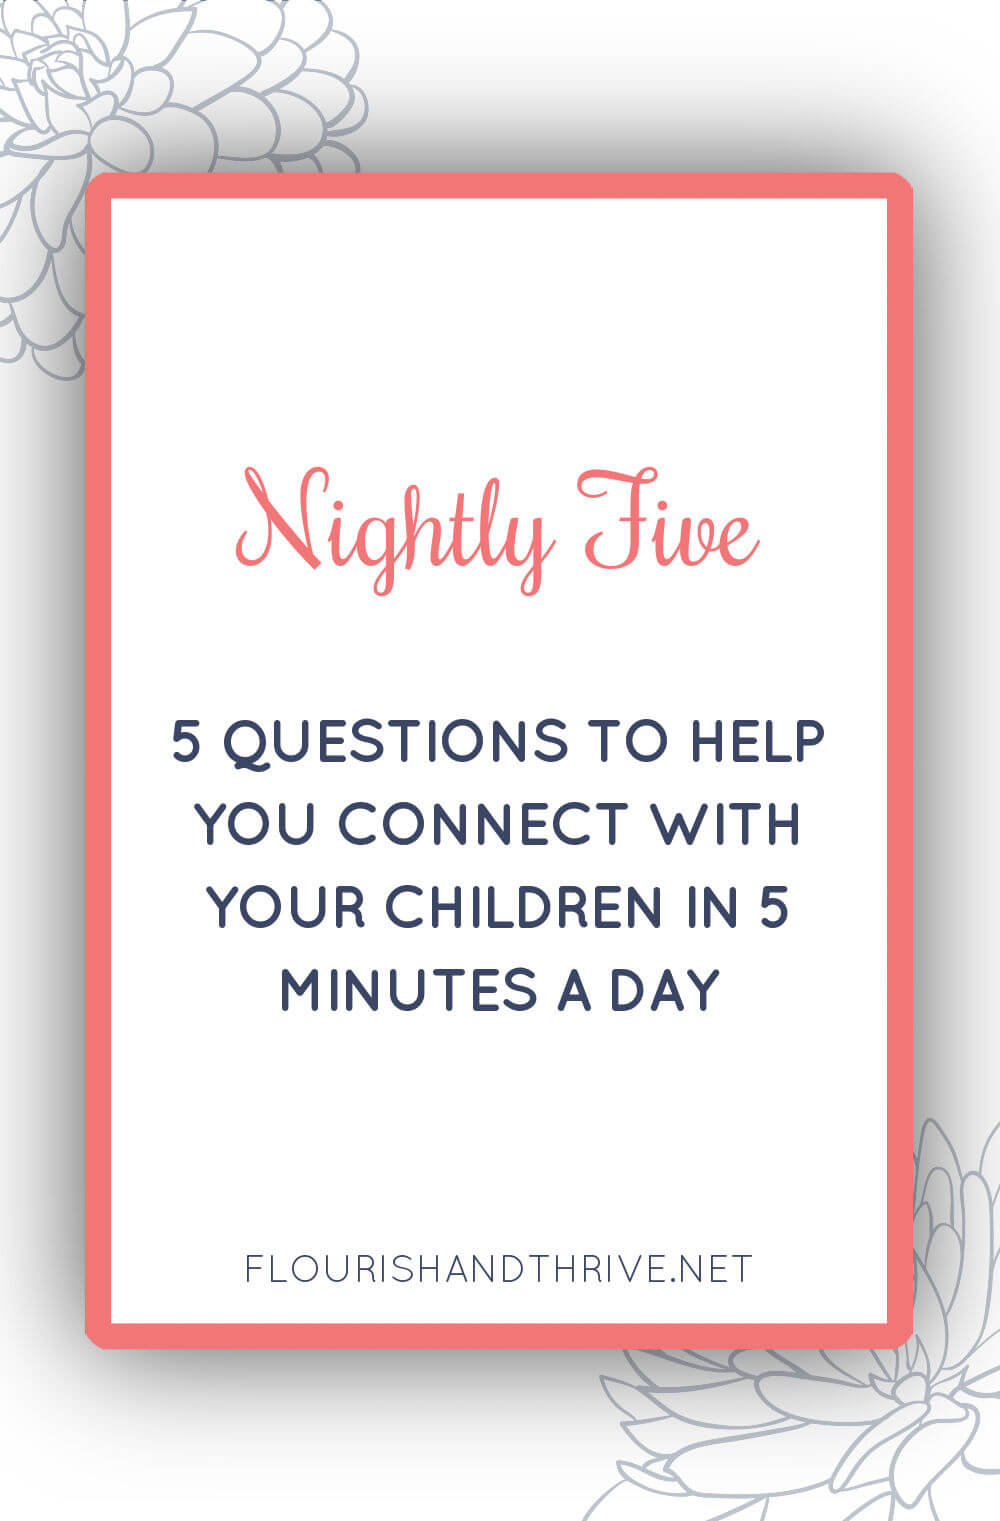 Connect with your children in five minutes a day by asking them these five questions. You'll hear their heart, earn their trust, and help them process their day. PLUS, you can watch a video of helpful tips for implementing it in your home. via @TriLearning